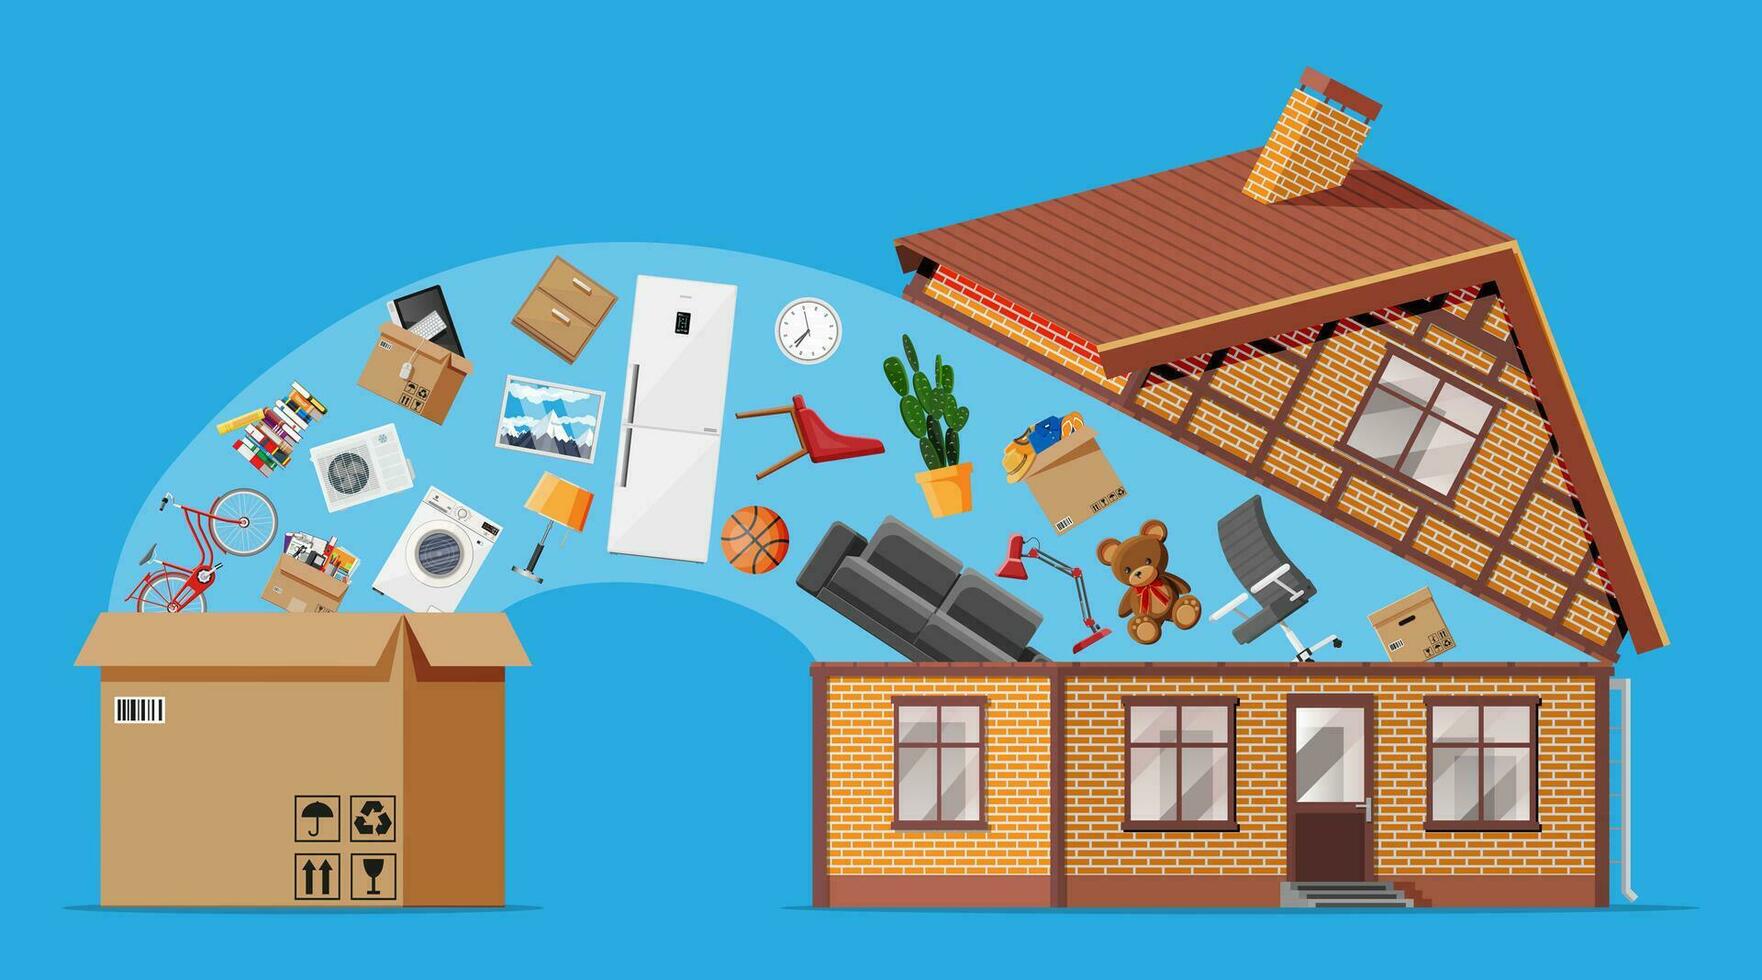 Wooden building full of home stuff inside. Moving to new house. Family relocated to new home. Boxes with goods. Package transportation. Computer, lamp, clothes, books. Flat vector illustration